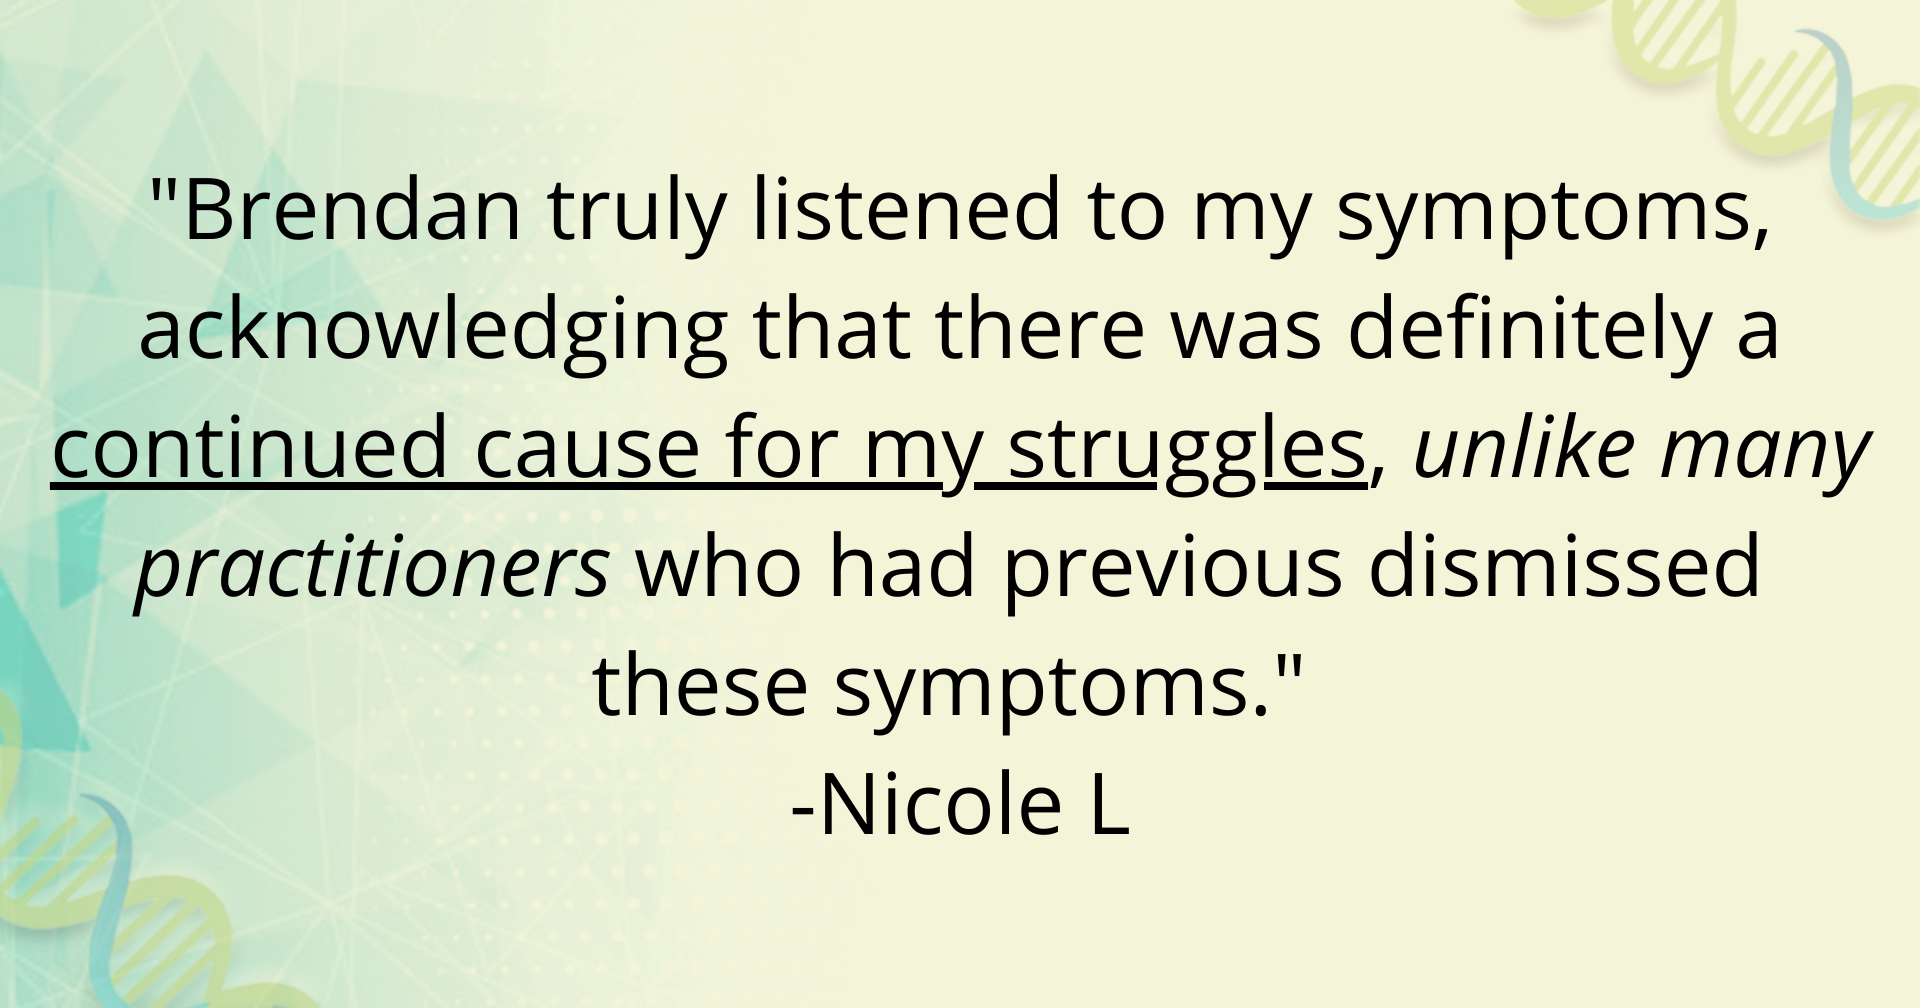 %22Brendan truly listened to my symptoms, acknowledging that there was definitely a continued cause for my struggles, unlike many practitioners who had previous dismissed these symptoms.%22 -Nicole-6.png